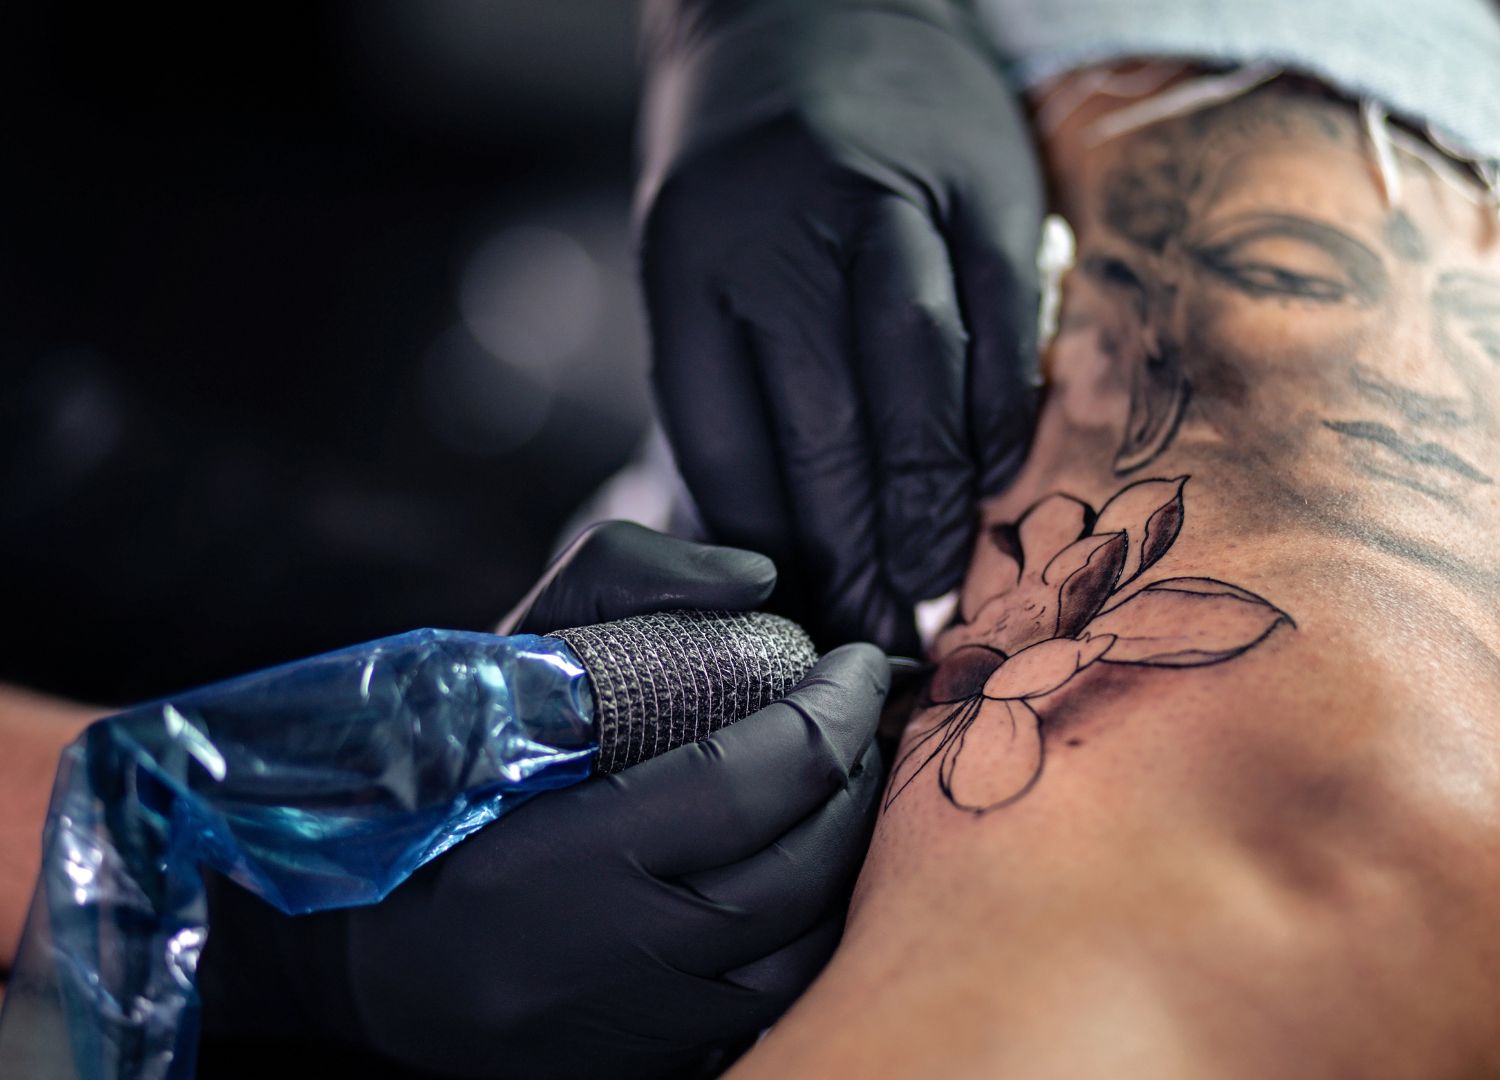 Health risks of tattoos and how to stay safe (Pidgin)